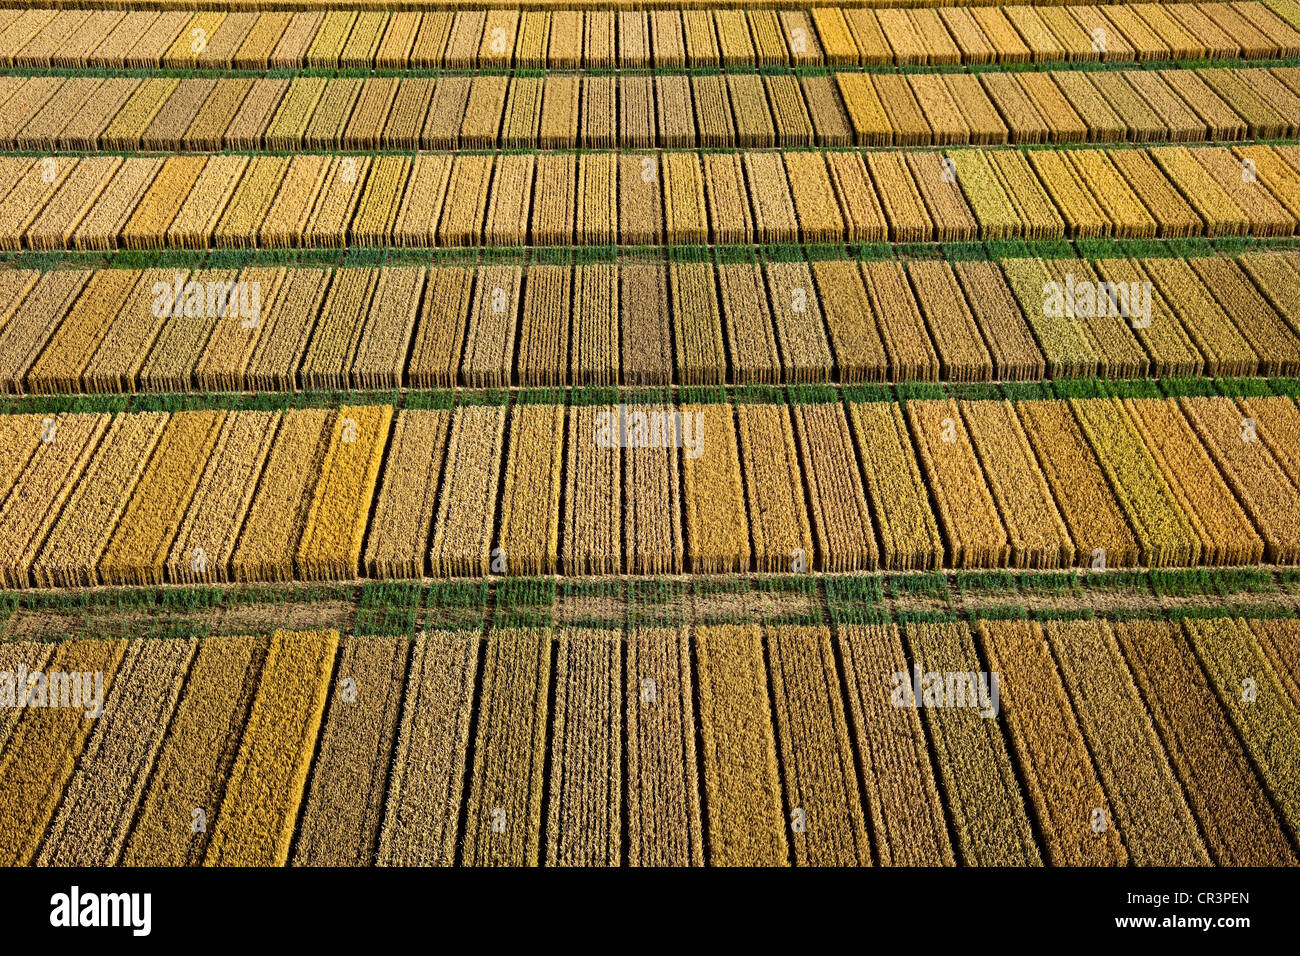 France, Eure, Cesseville, experimental cultivation of wheat (aerial view) Stock Photo